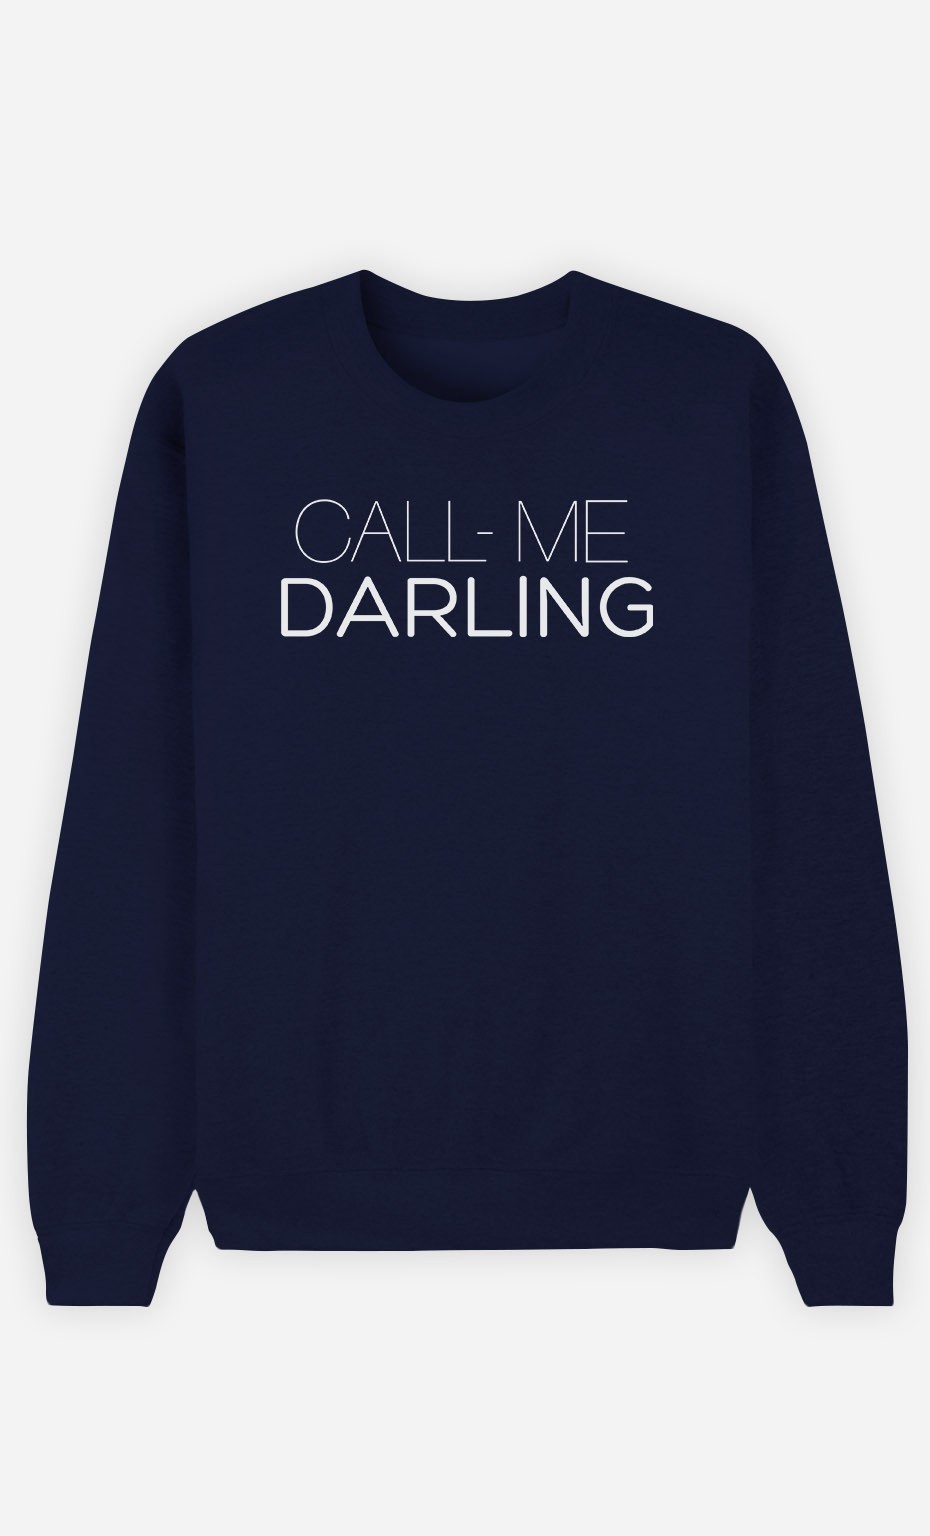 Why does he call me darling